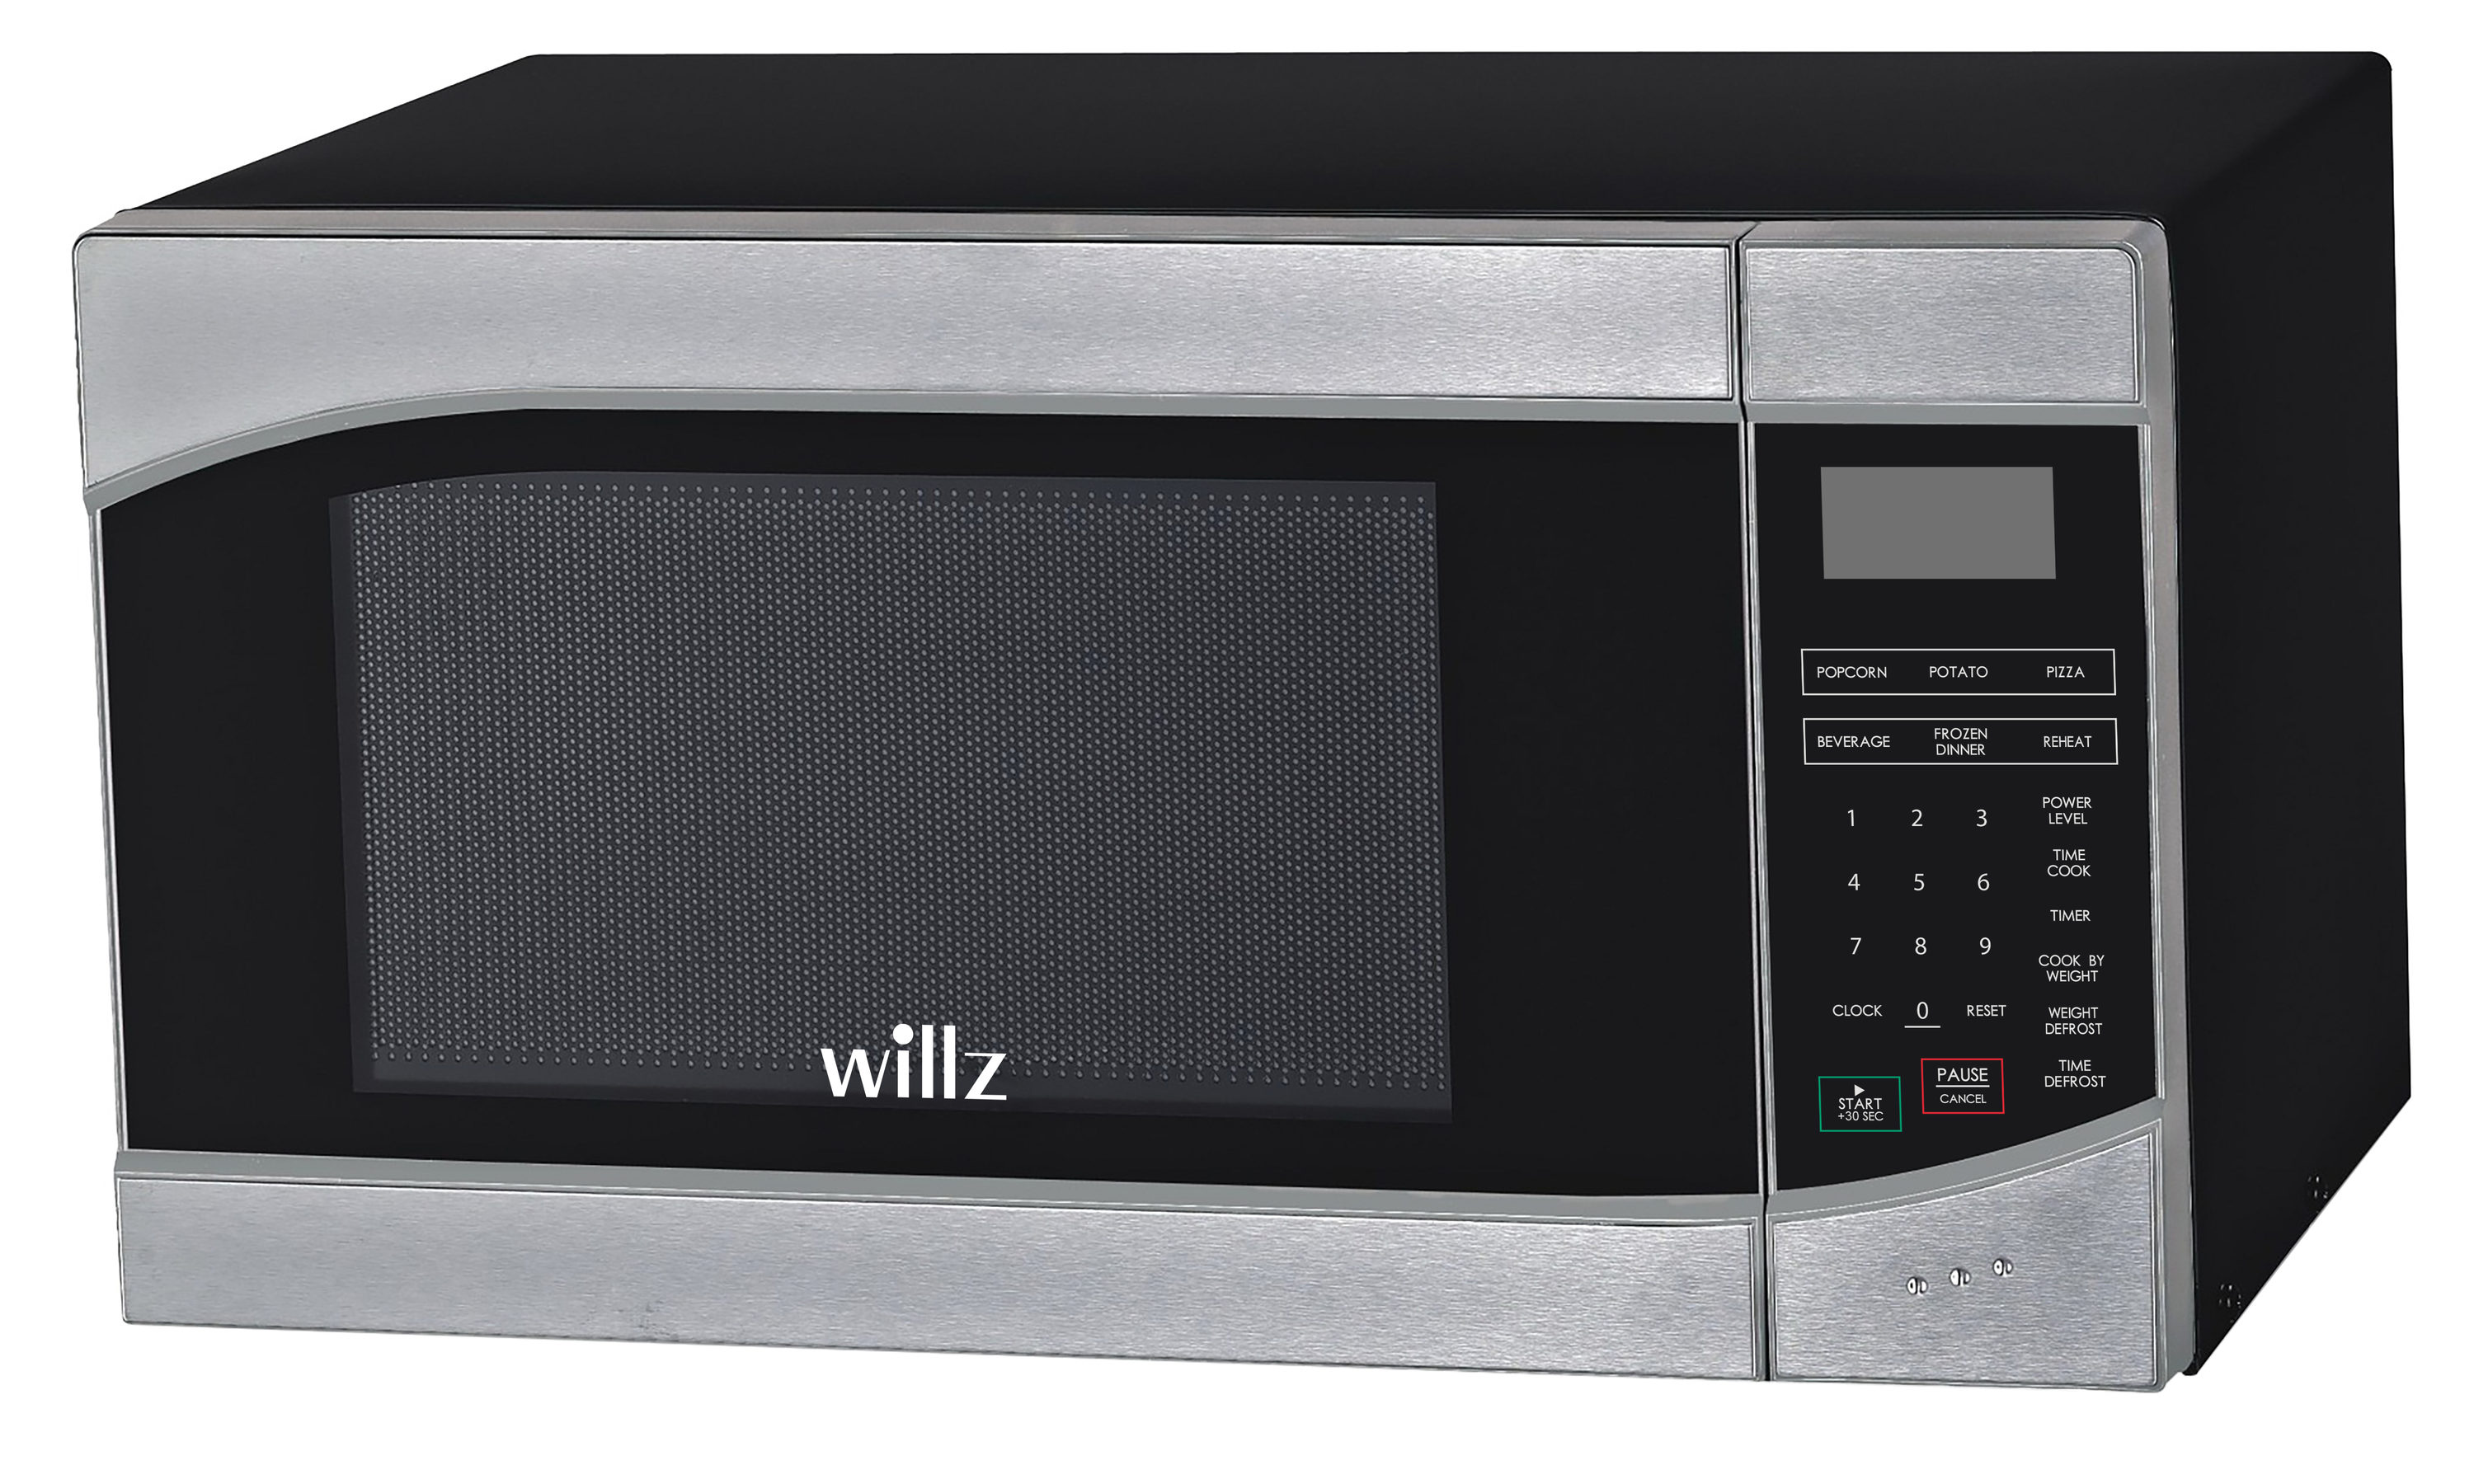 0.9 Cu. Ft. Stainless Steel Countertop Microwave Oven